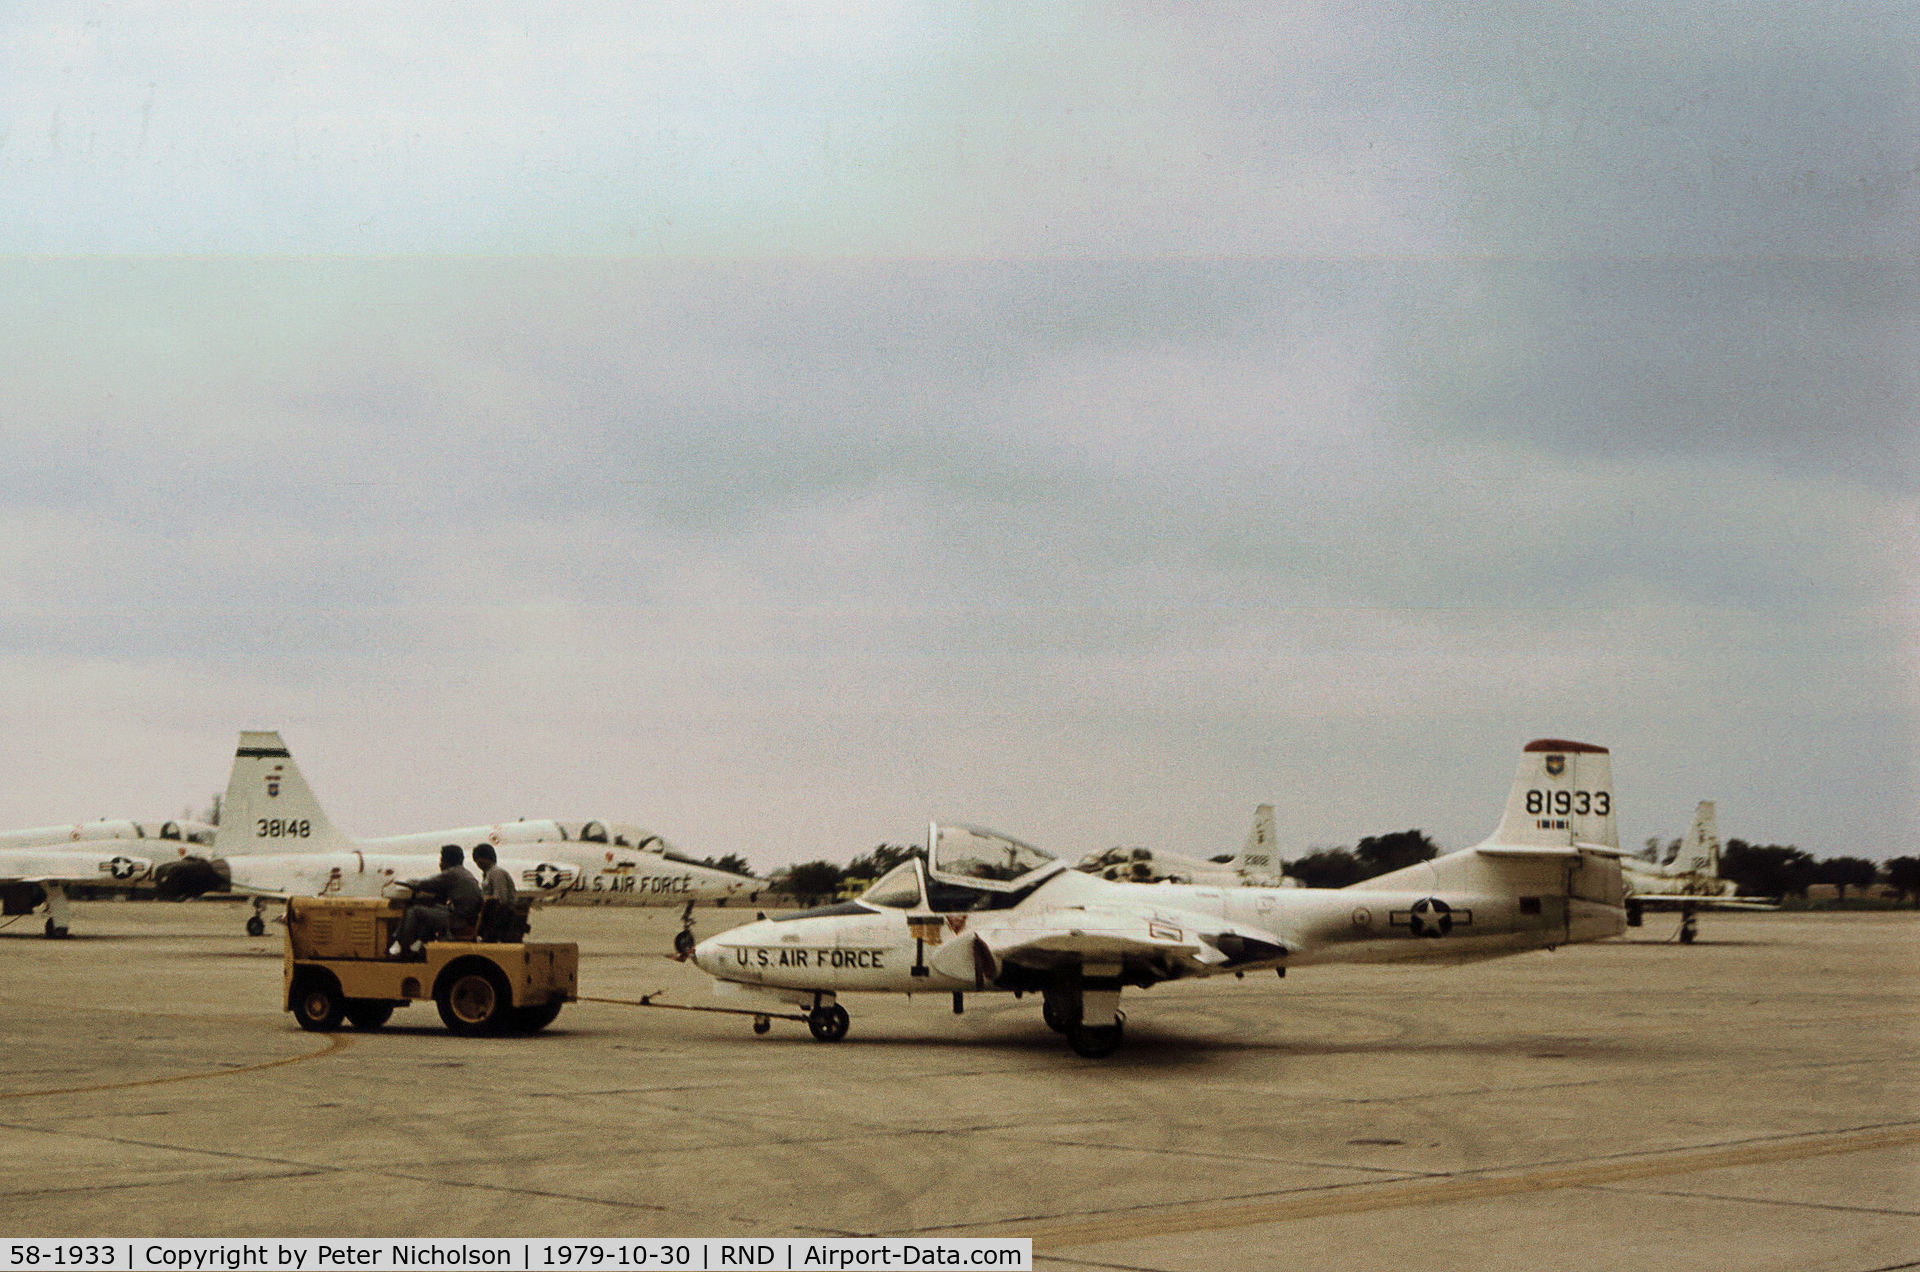 58-1933, 1958 Cessna T-37A Tweety Bird C/N 40358, Cessna T-37A of the 12th Flying Training Wing at Randolph AFB in November 1979.